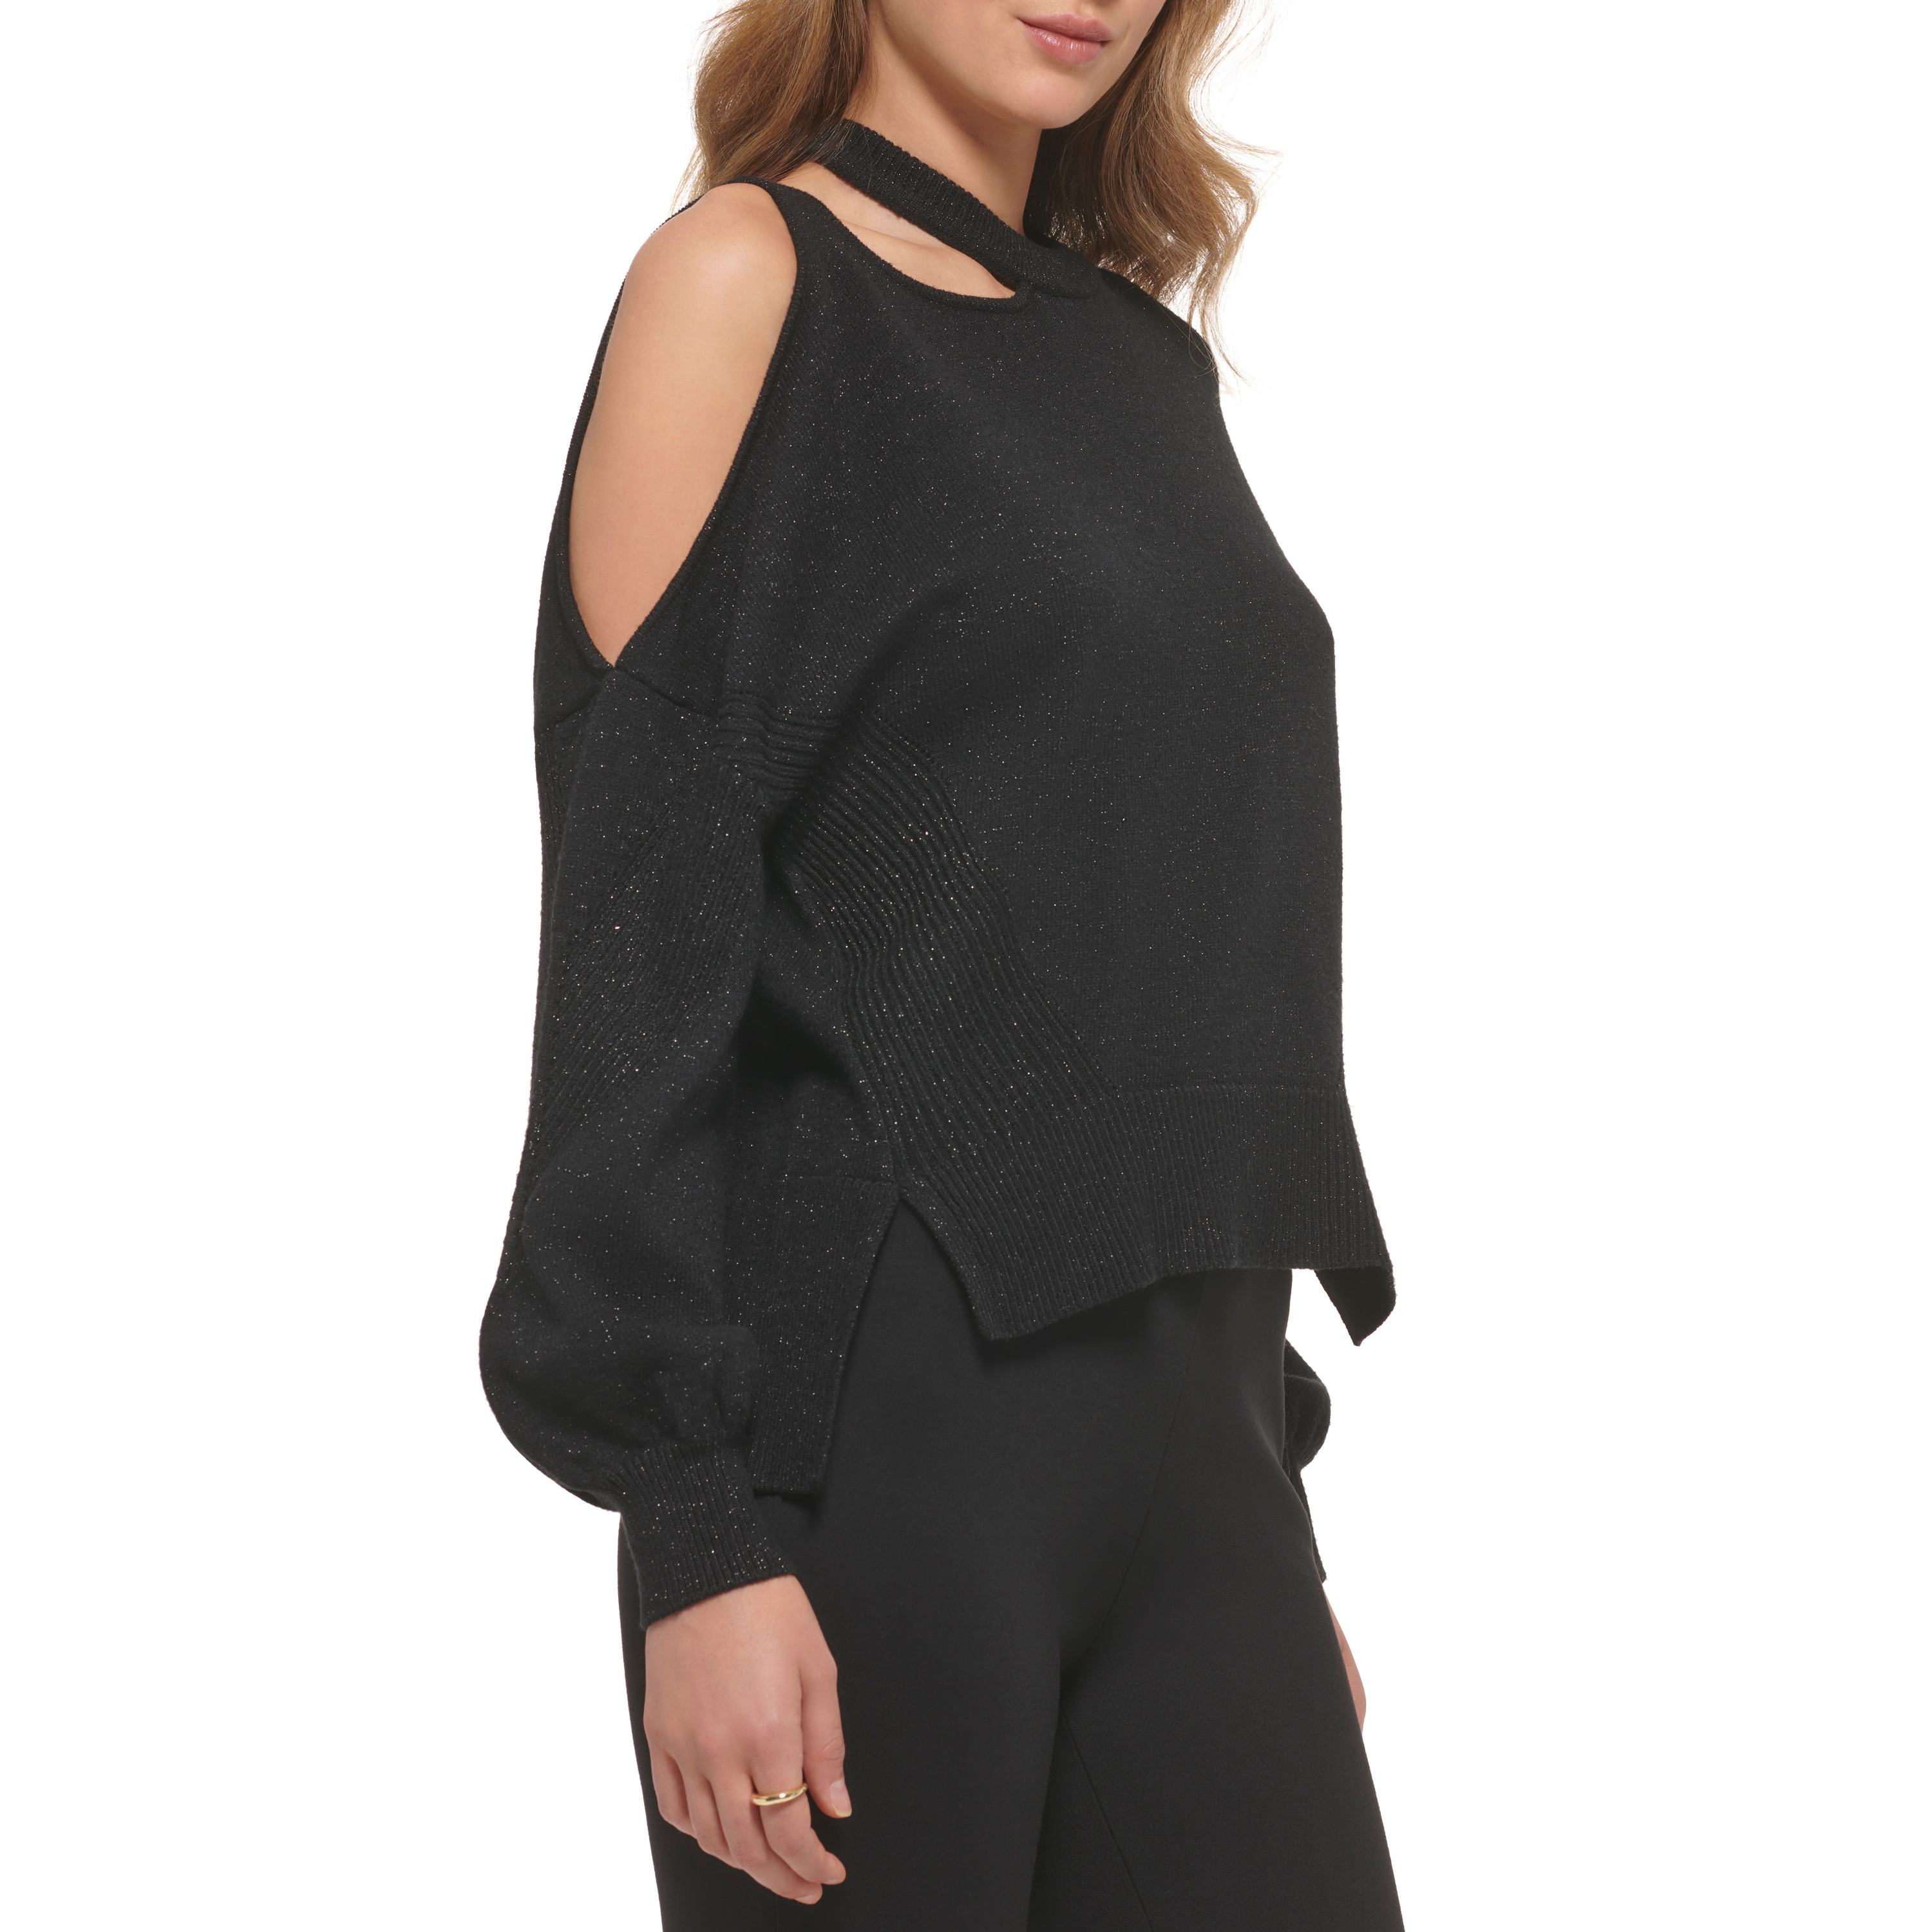 DKNY - Sweater with cut out details, Black, large image number 3